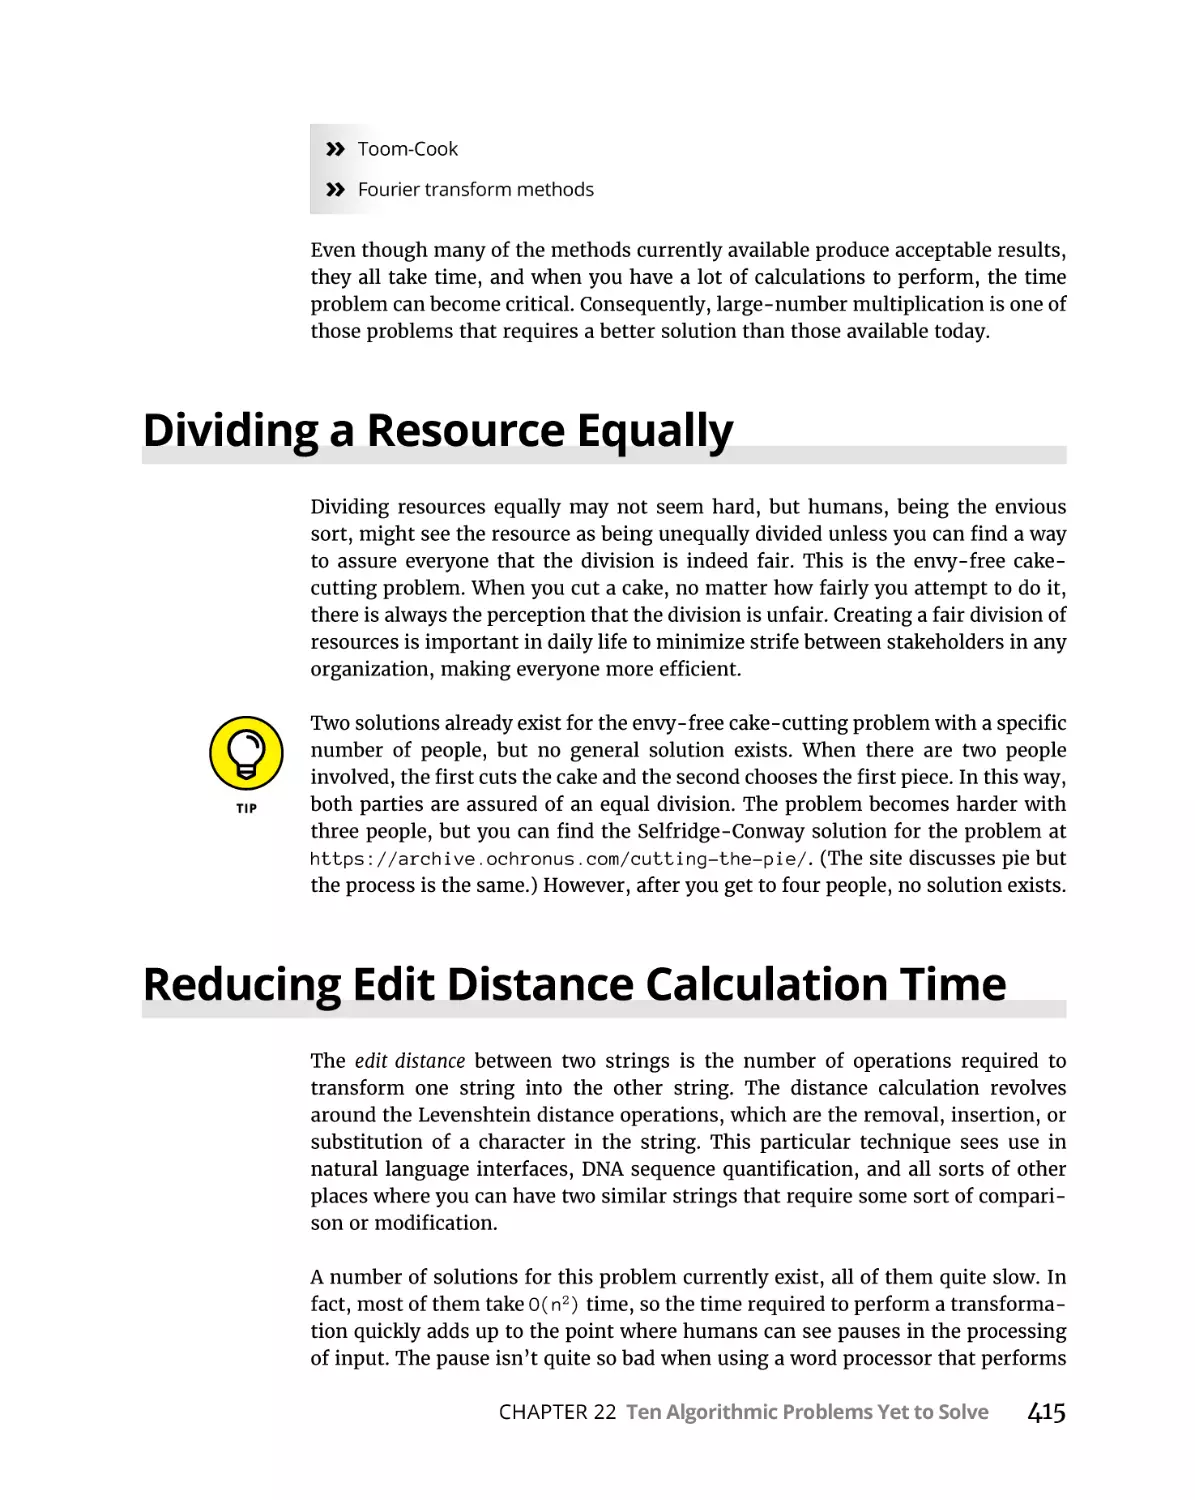 Dividing a Resource Equally
Reducing Edit Distance Calculation Time